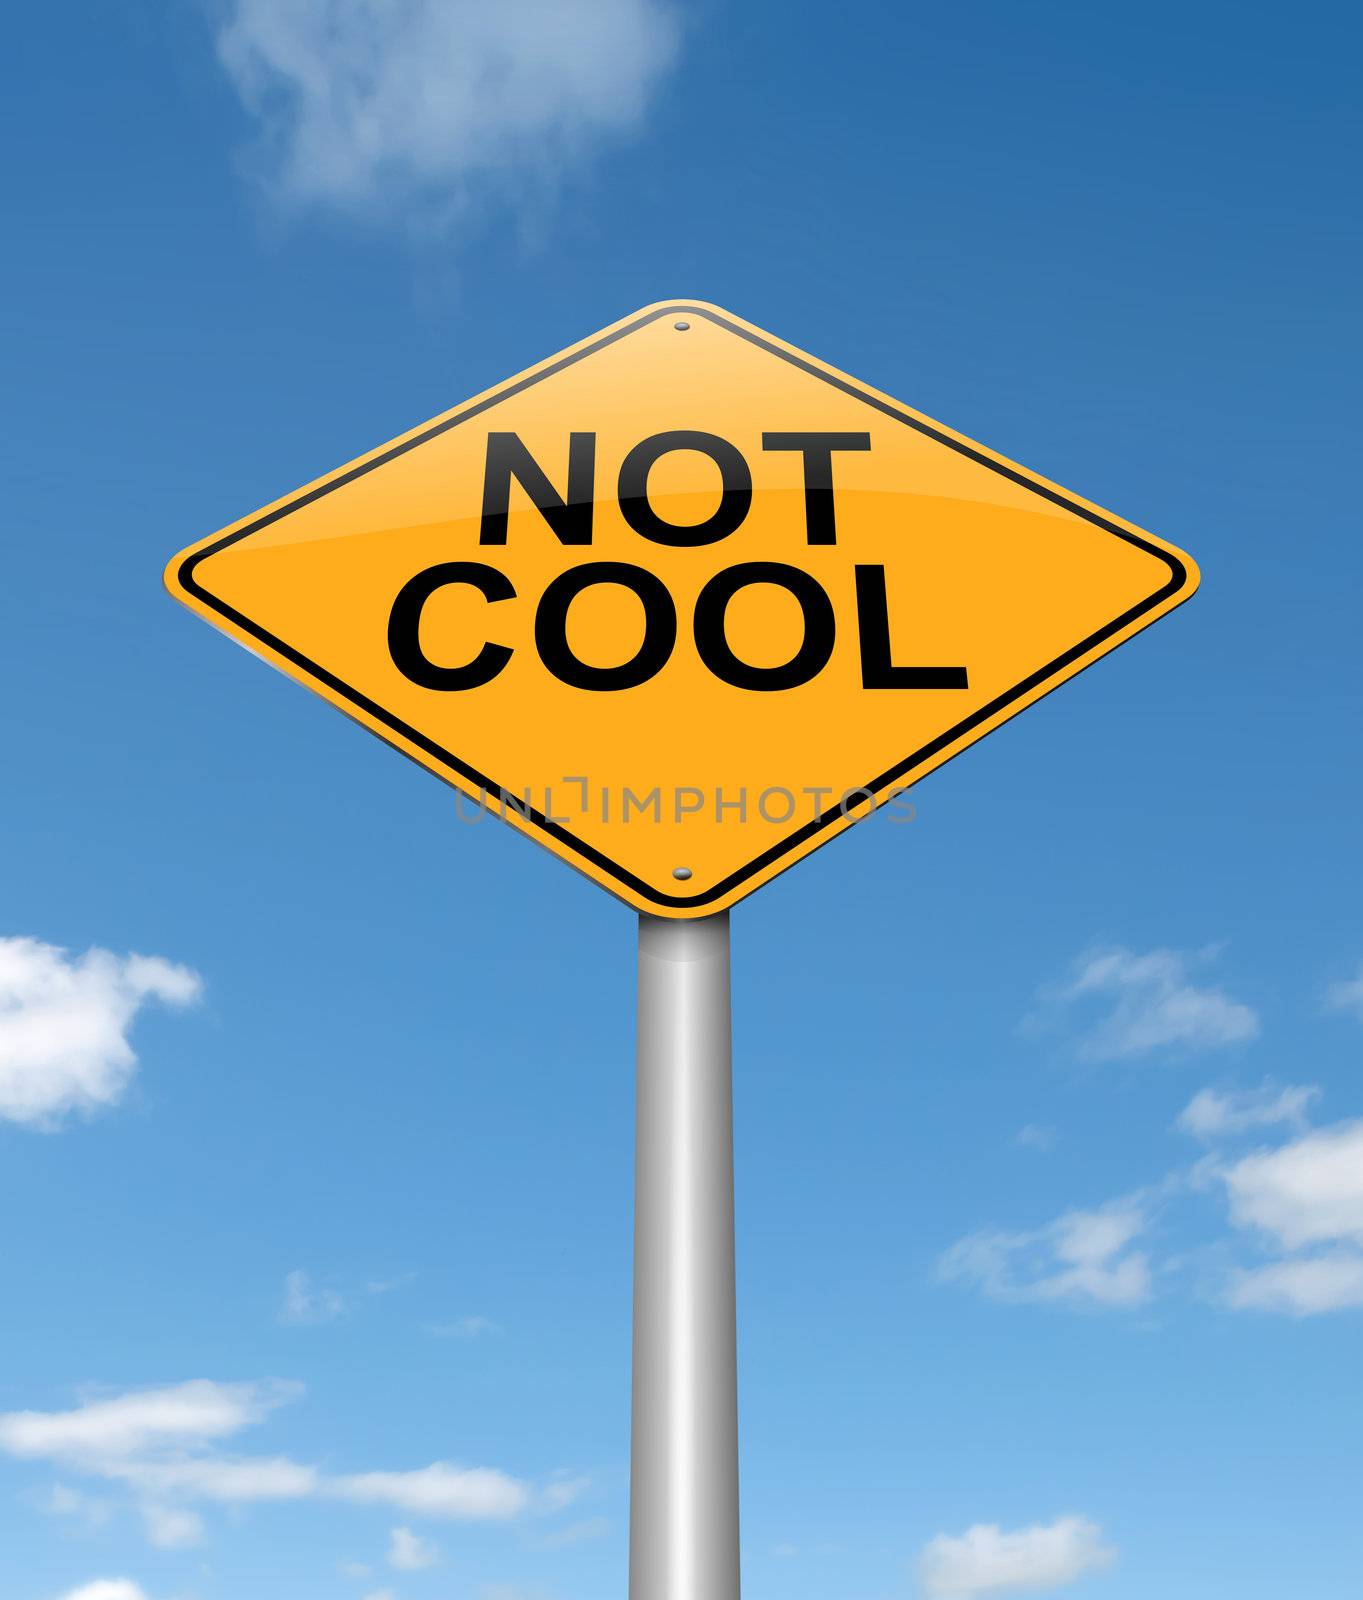 Illustration depicting a sign with a not cool concept.